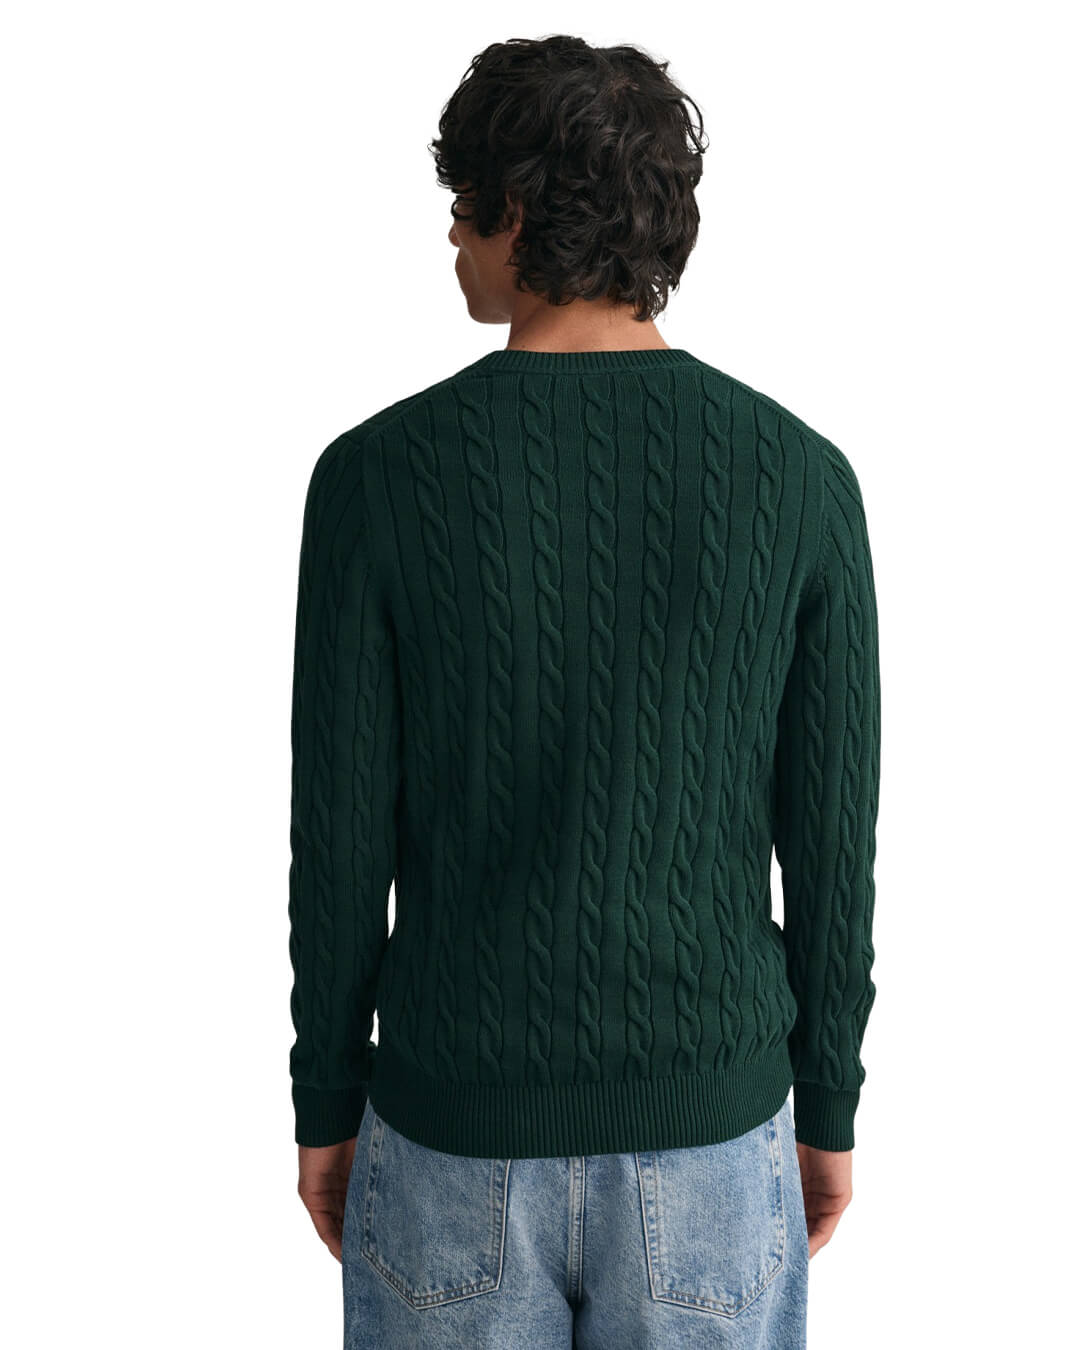 Gant Jumpers Gant Tartan Green Cotton Cable Knit Crew Neck Sweater